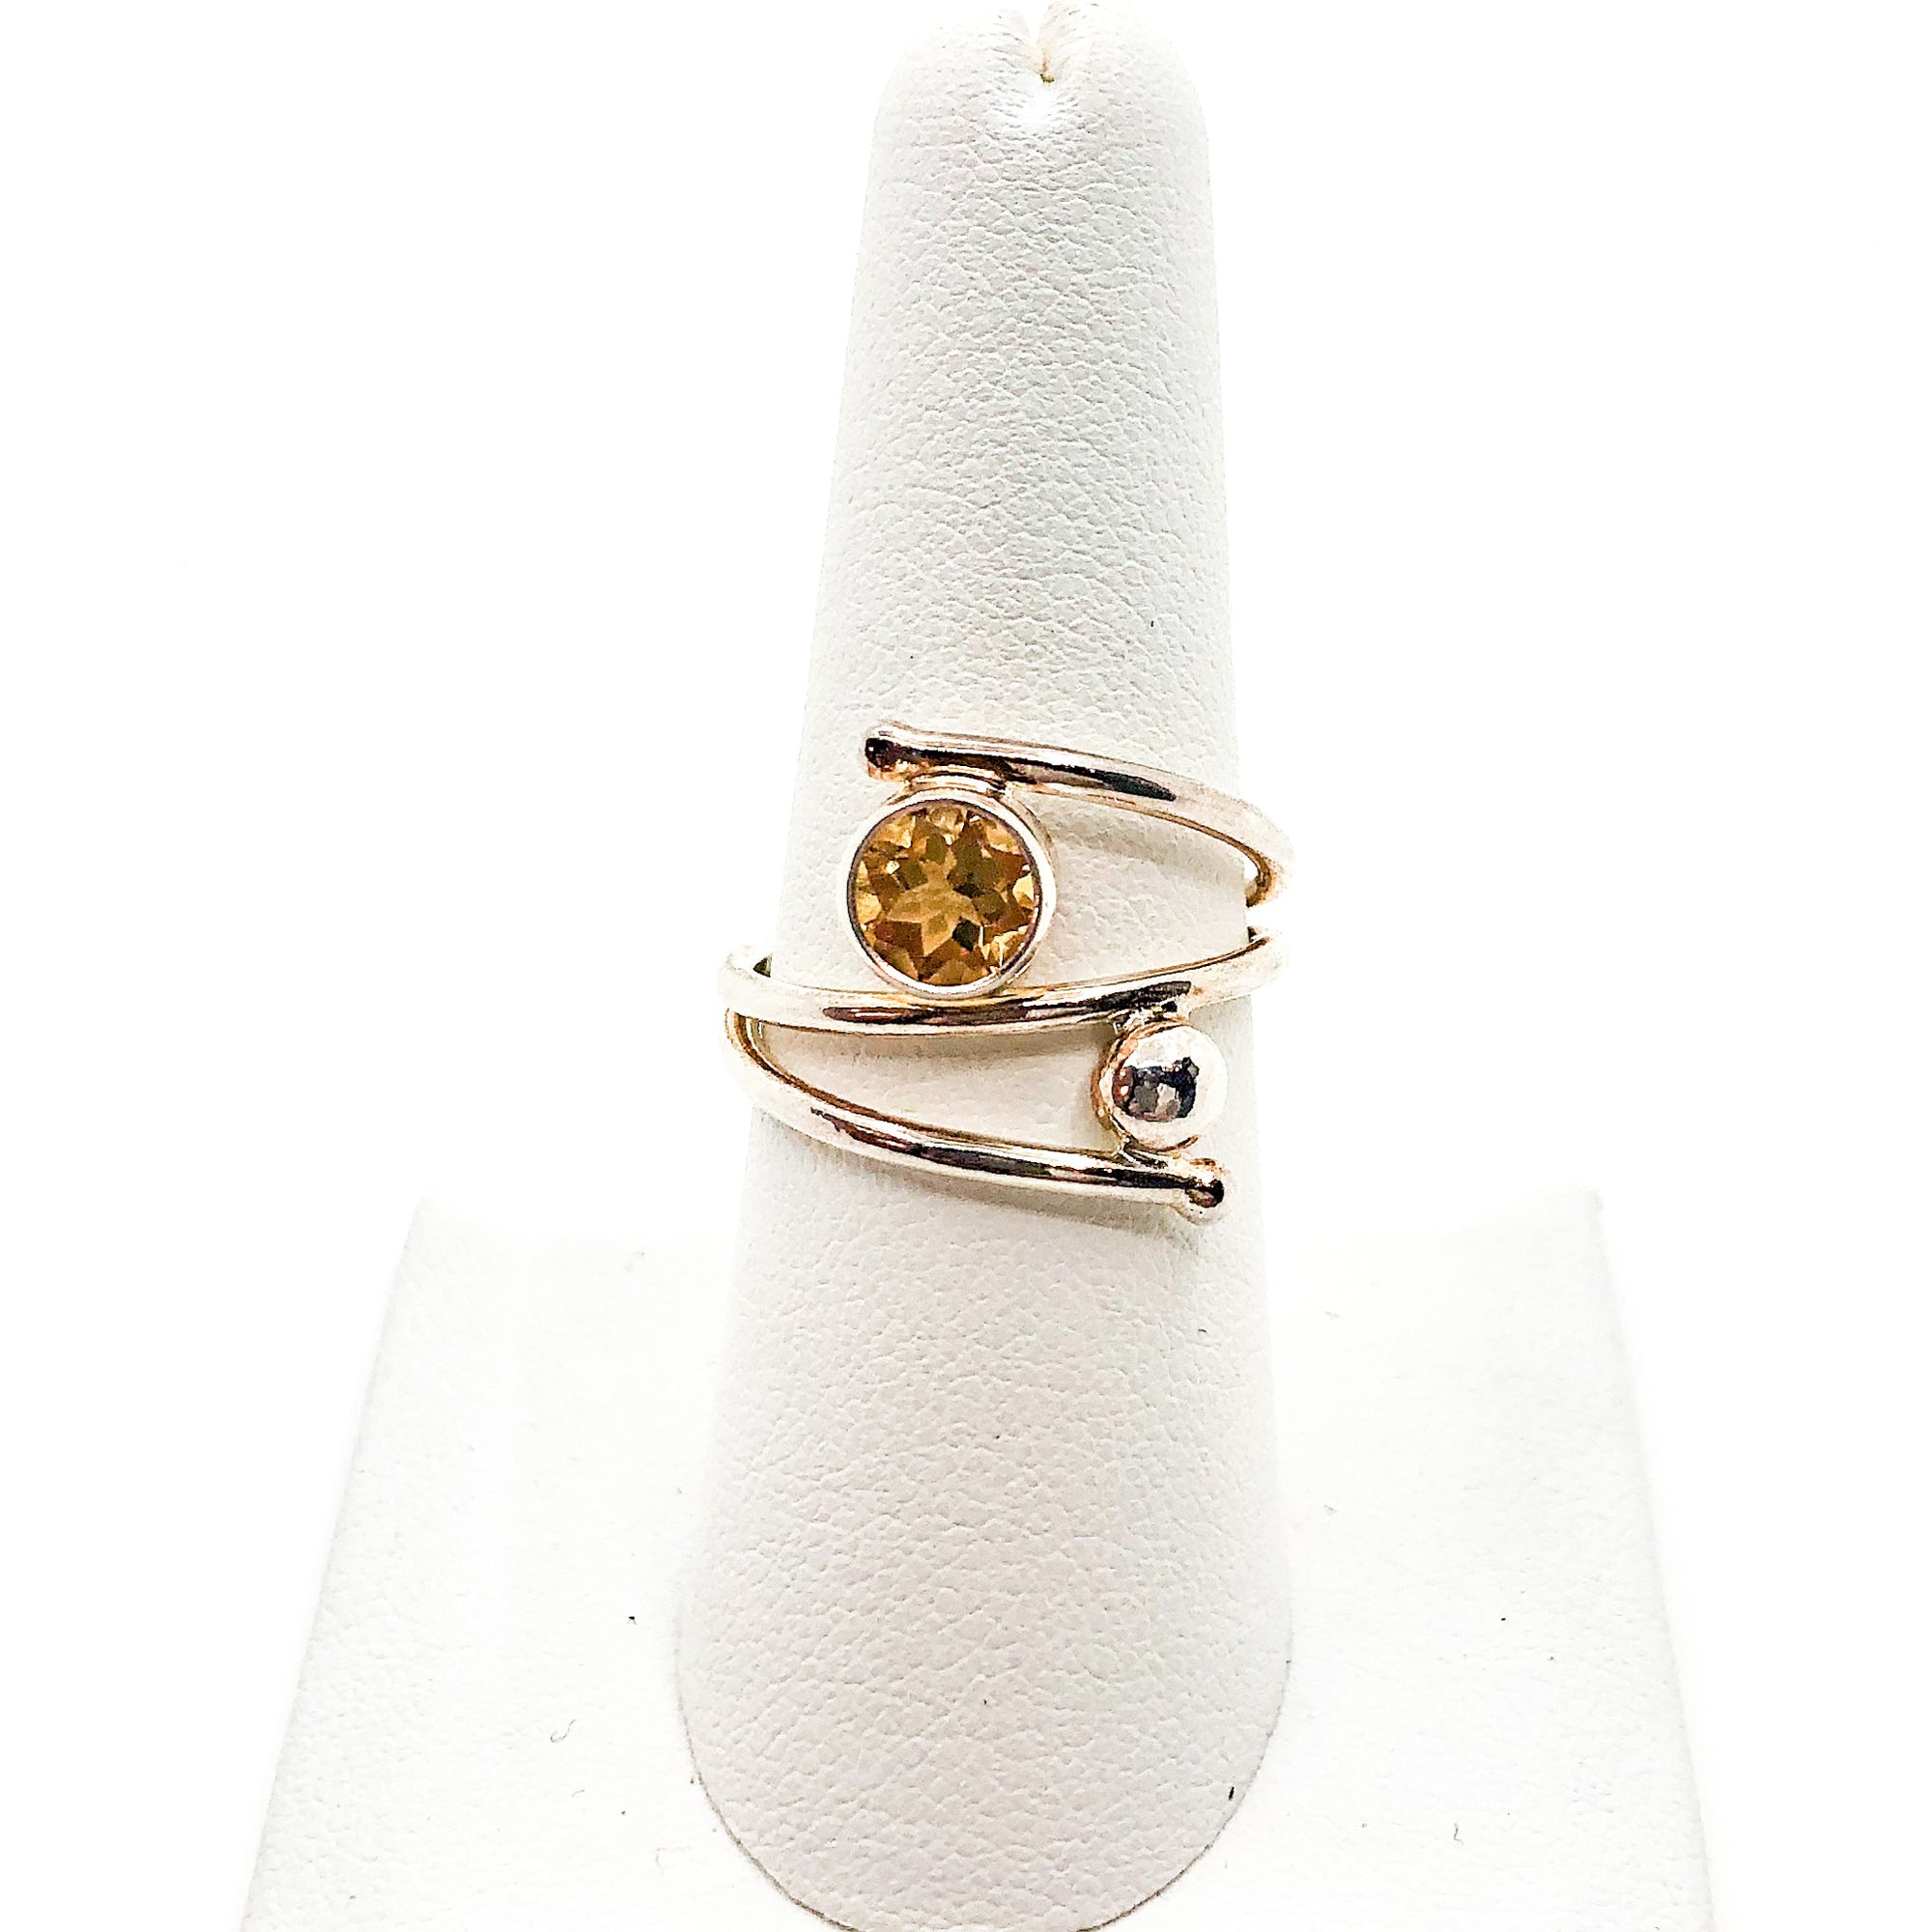 Sterling Bypass Ring with Citrine